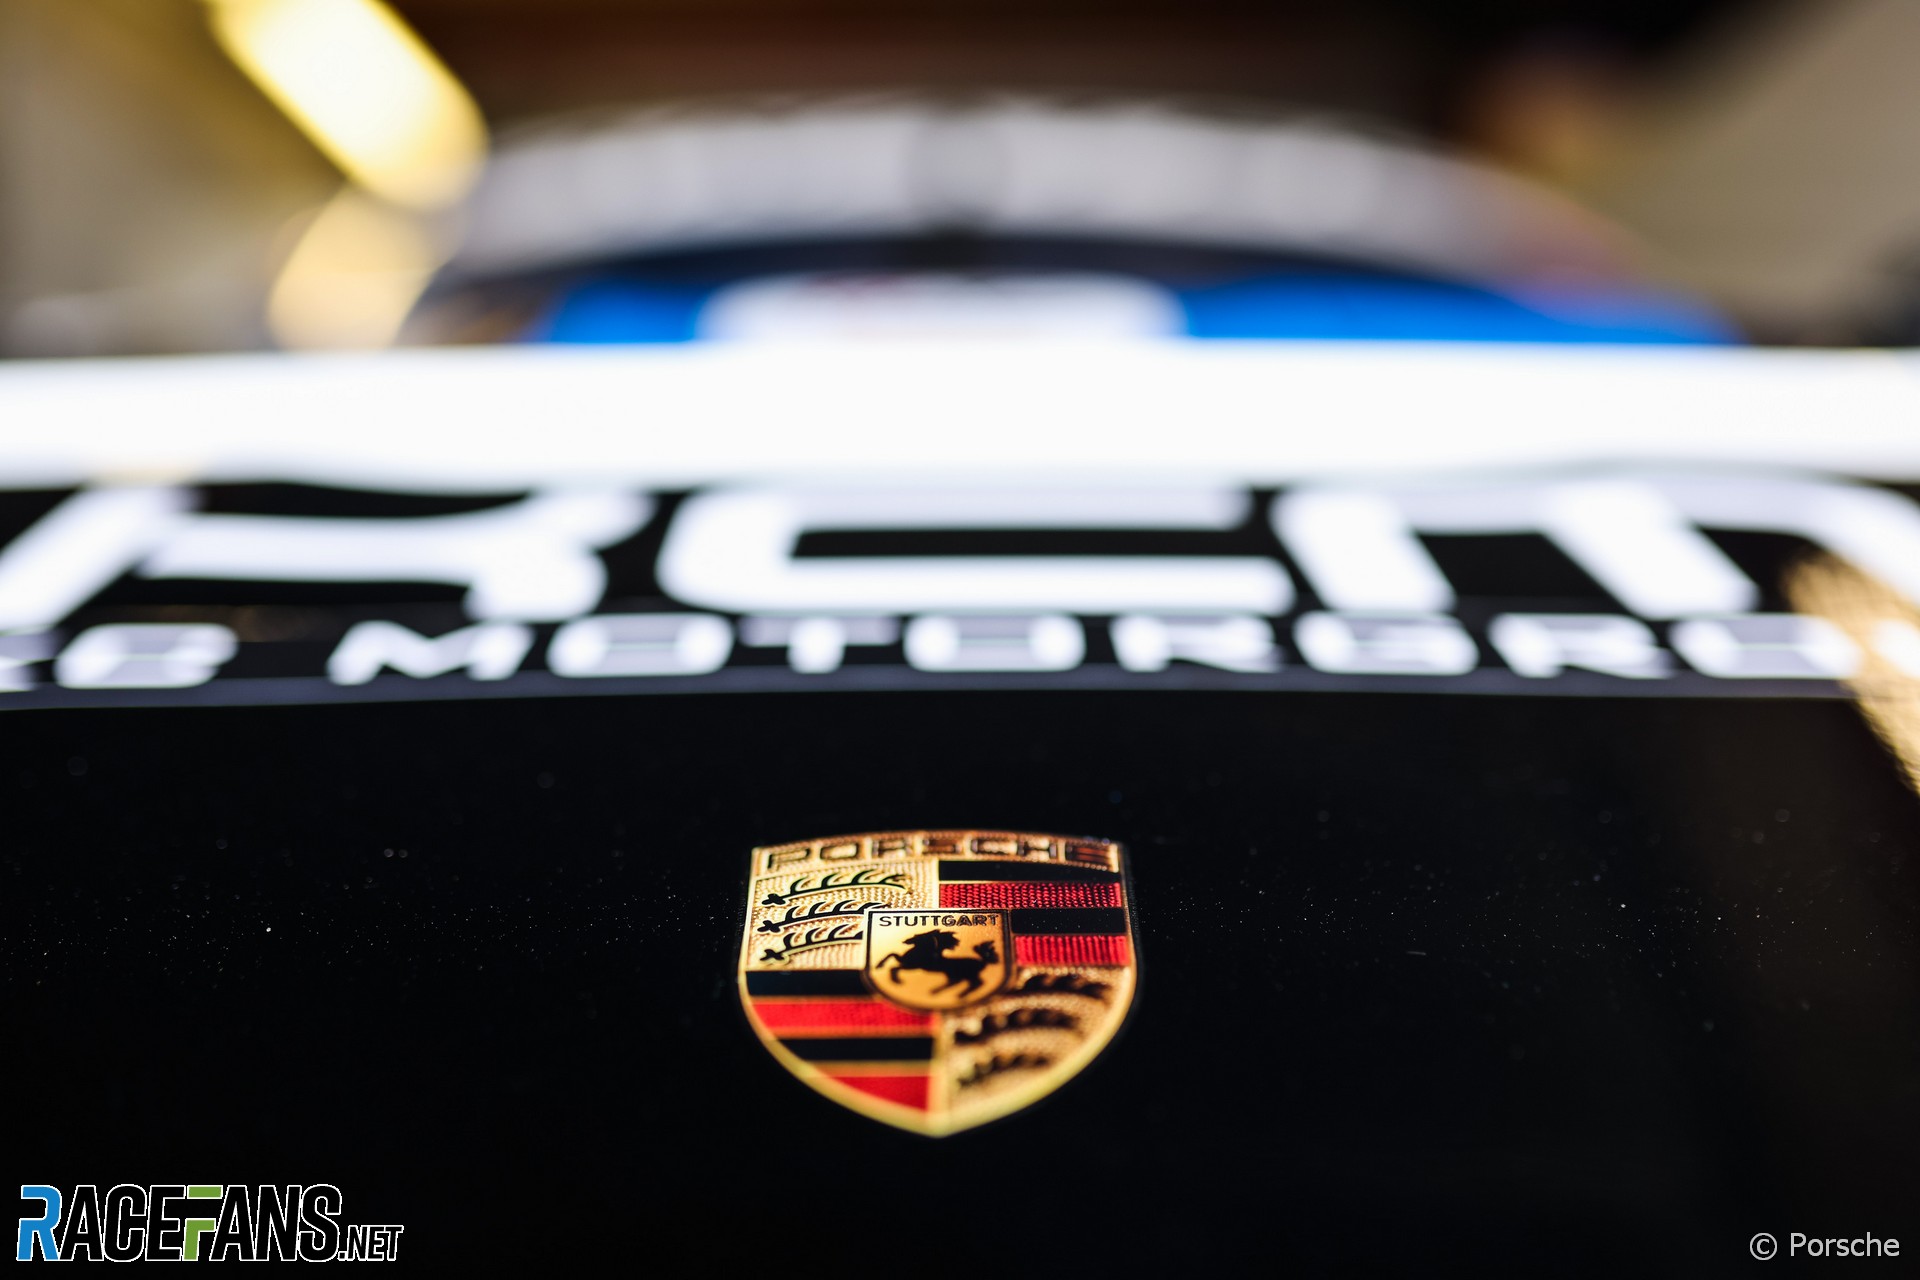 Porsche confirms it will not enter Formula 1 with Red Bull · RaceFans